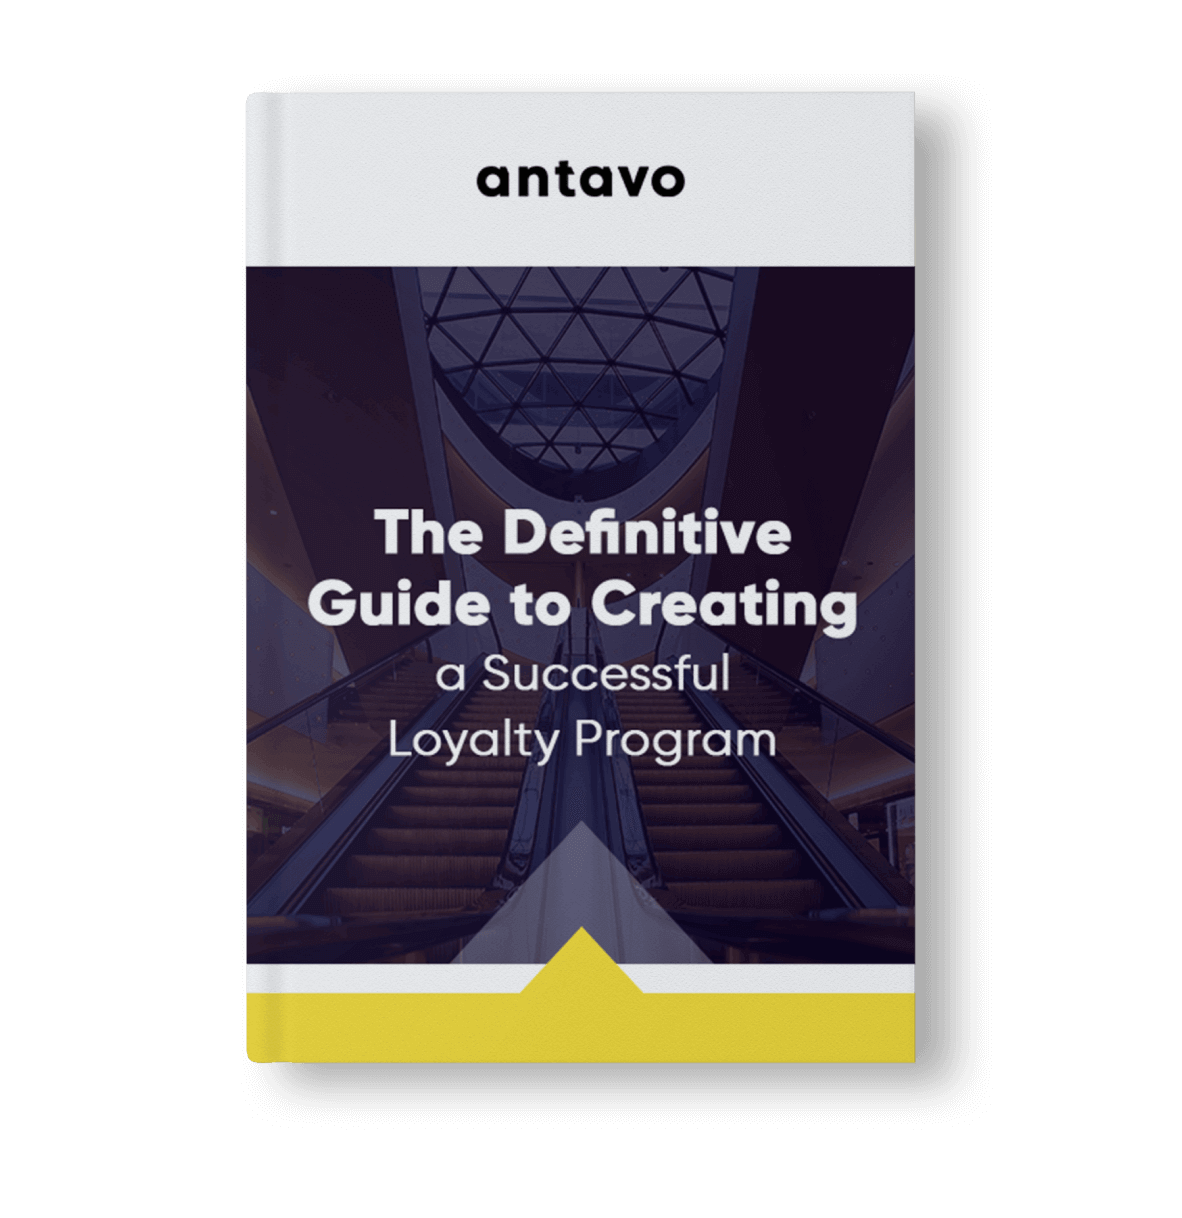 Antavo's Ebook: The Definitive Guide to Creating a Successful Loyalty Program